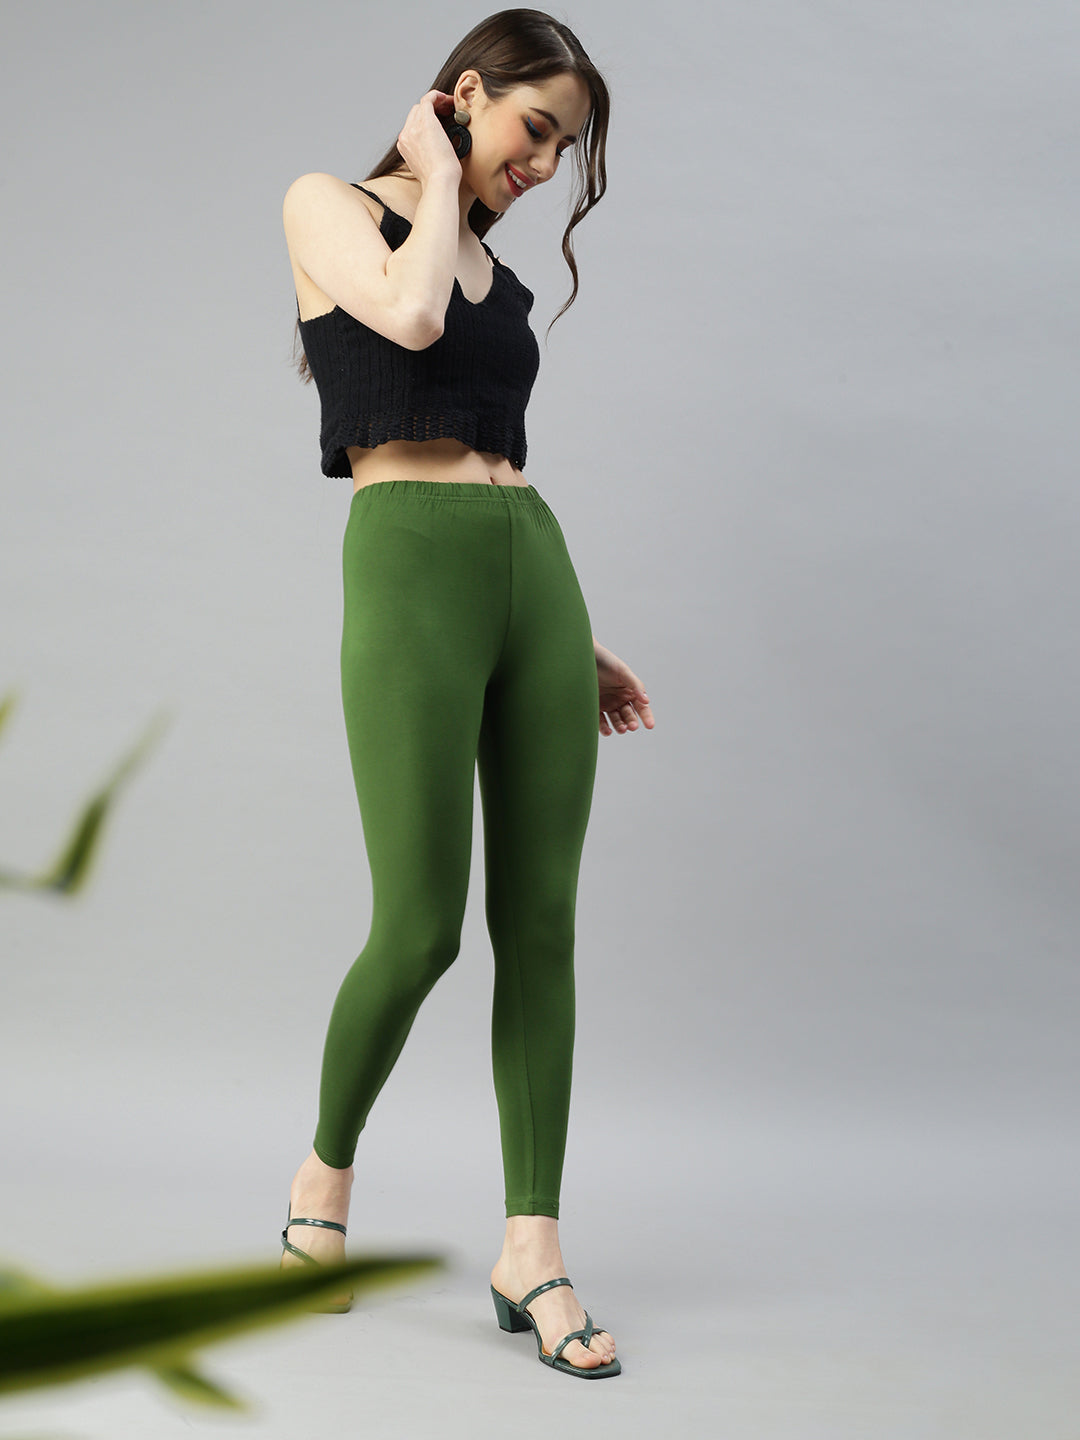 Ultra Stretch Rib Cross Over Leggings with side pocket, Olive Green – Sundry